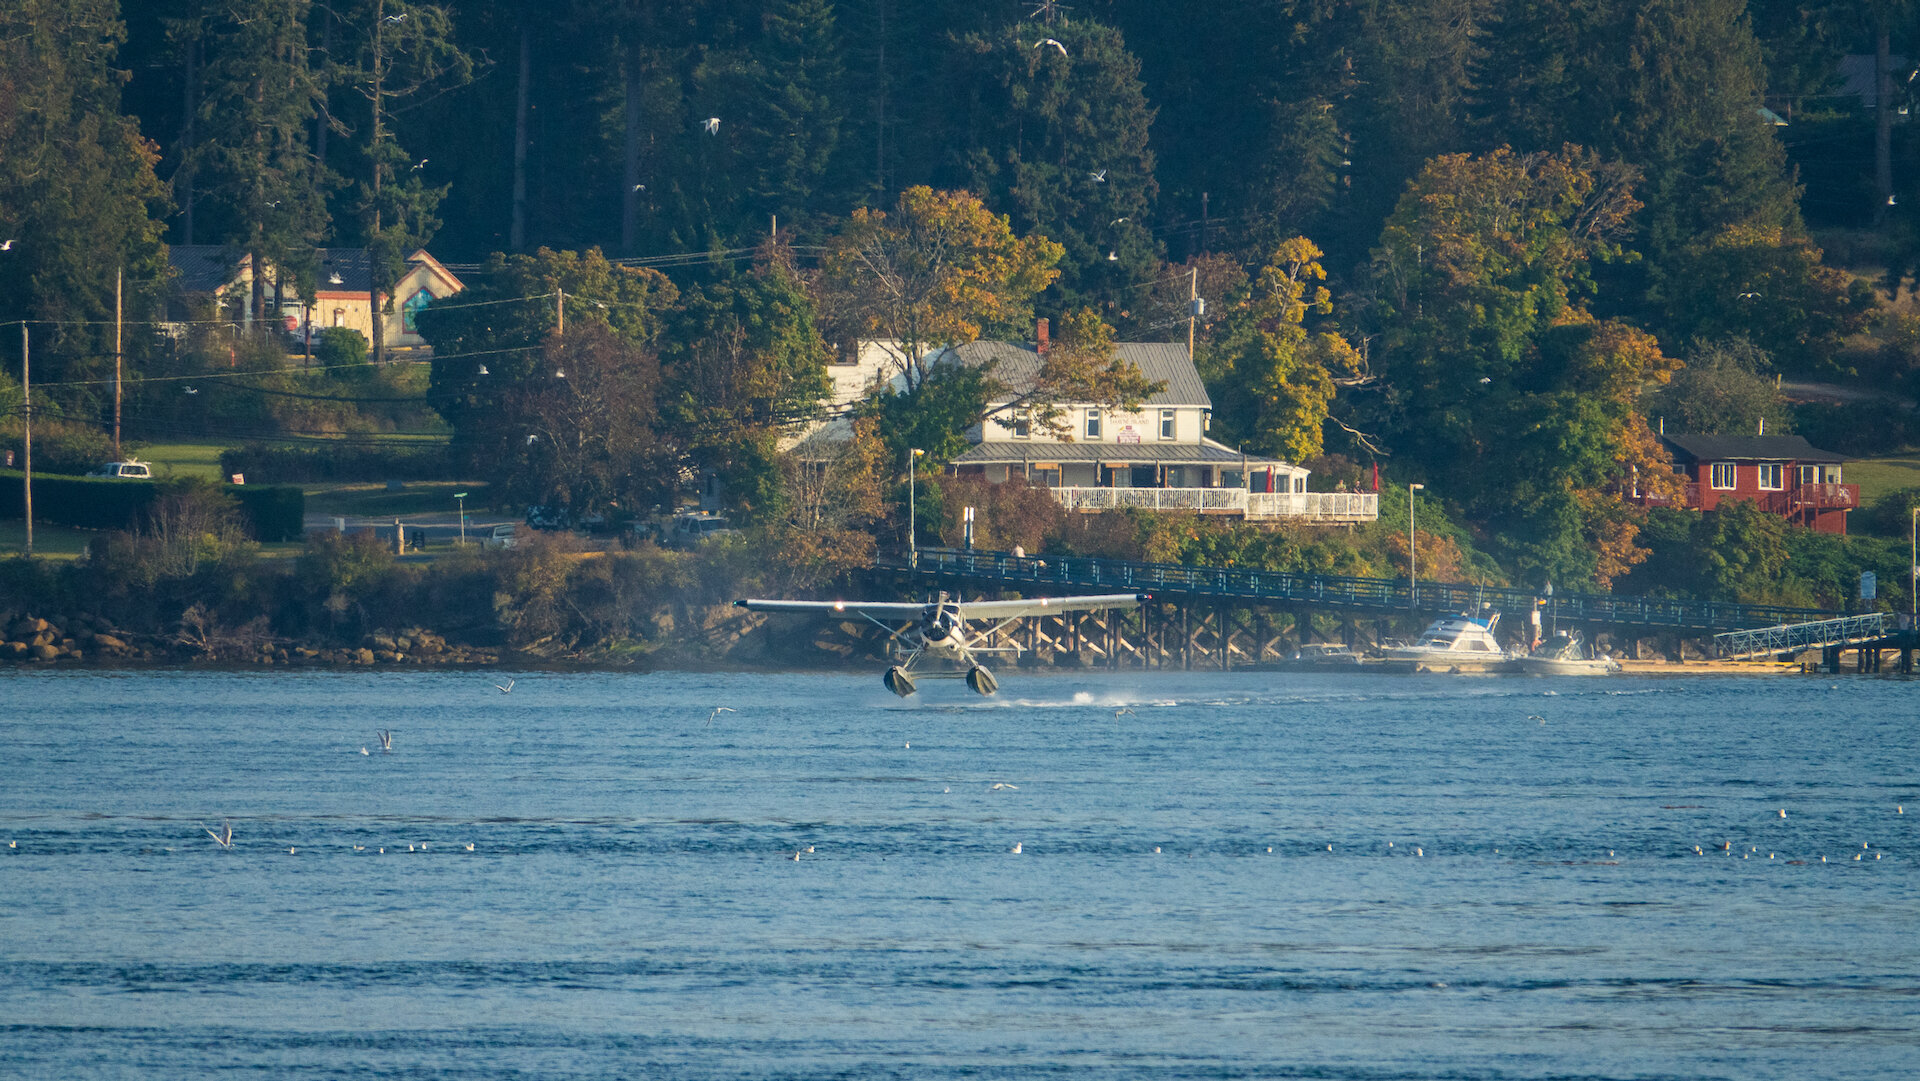  While we were there, a float plane took off from Mayne Island. Always cool to see. 